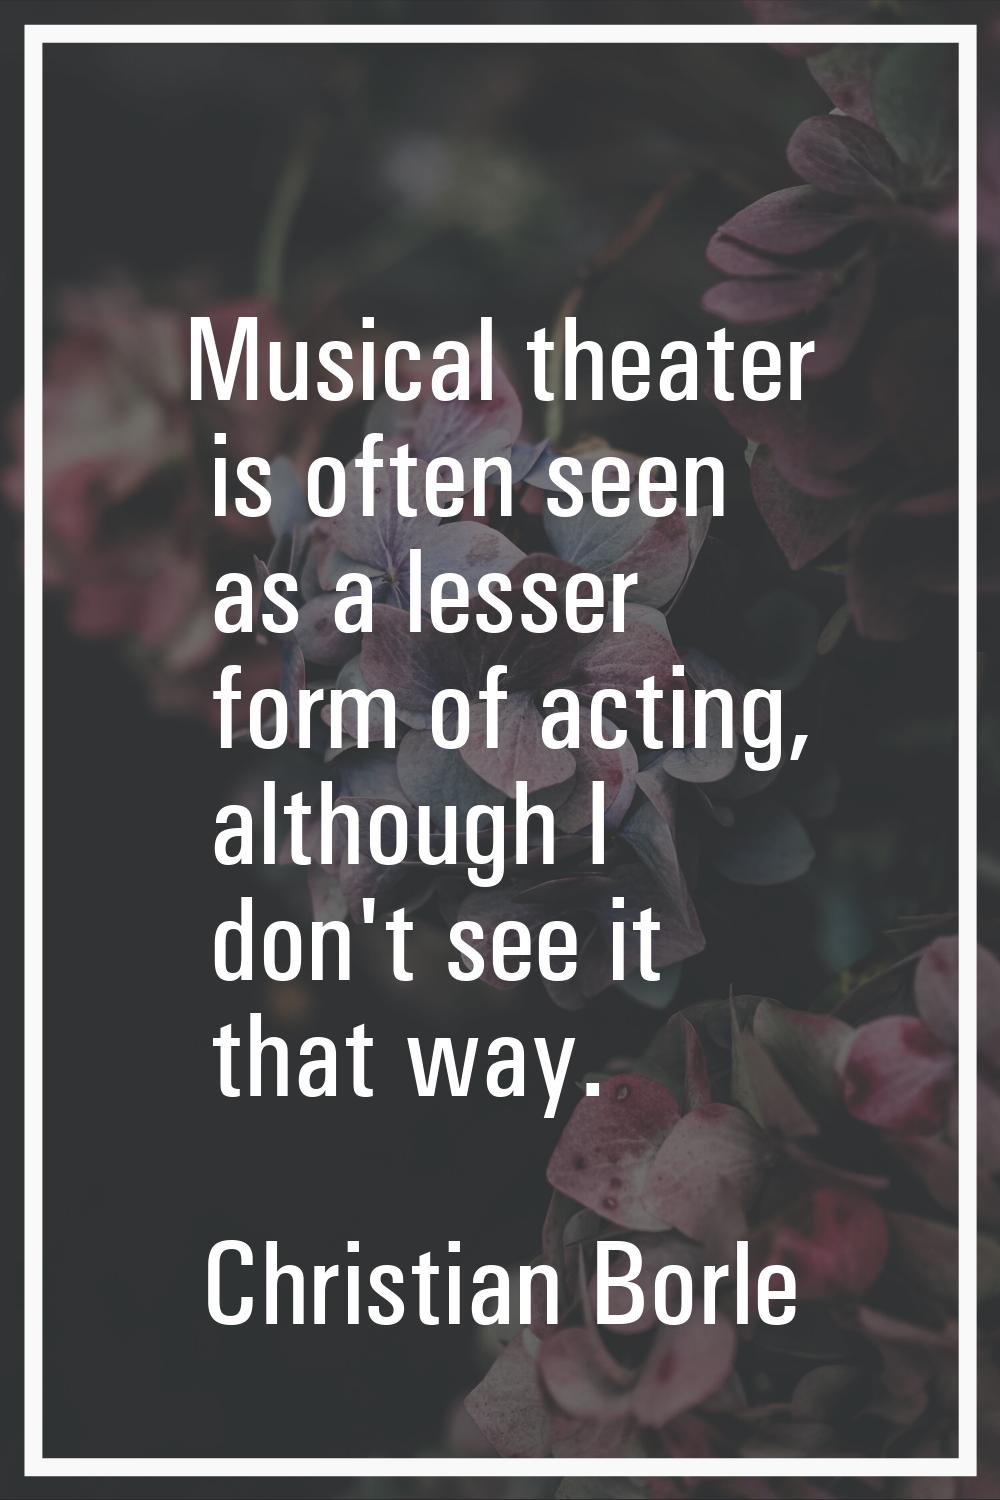 Musical theater is often seen as a lesser form of acting, although I don't see it that way.